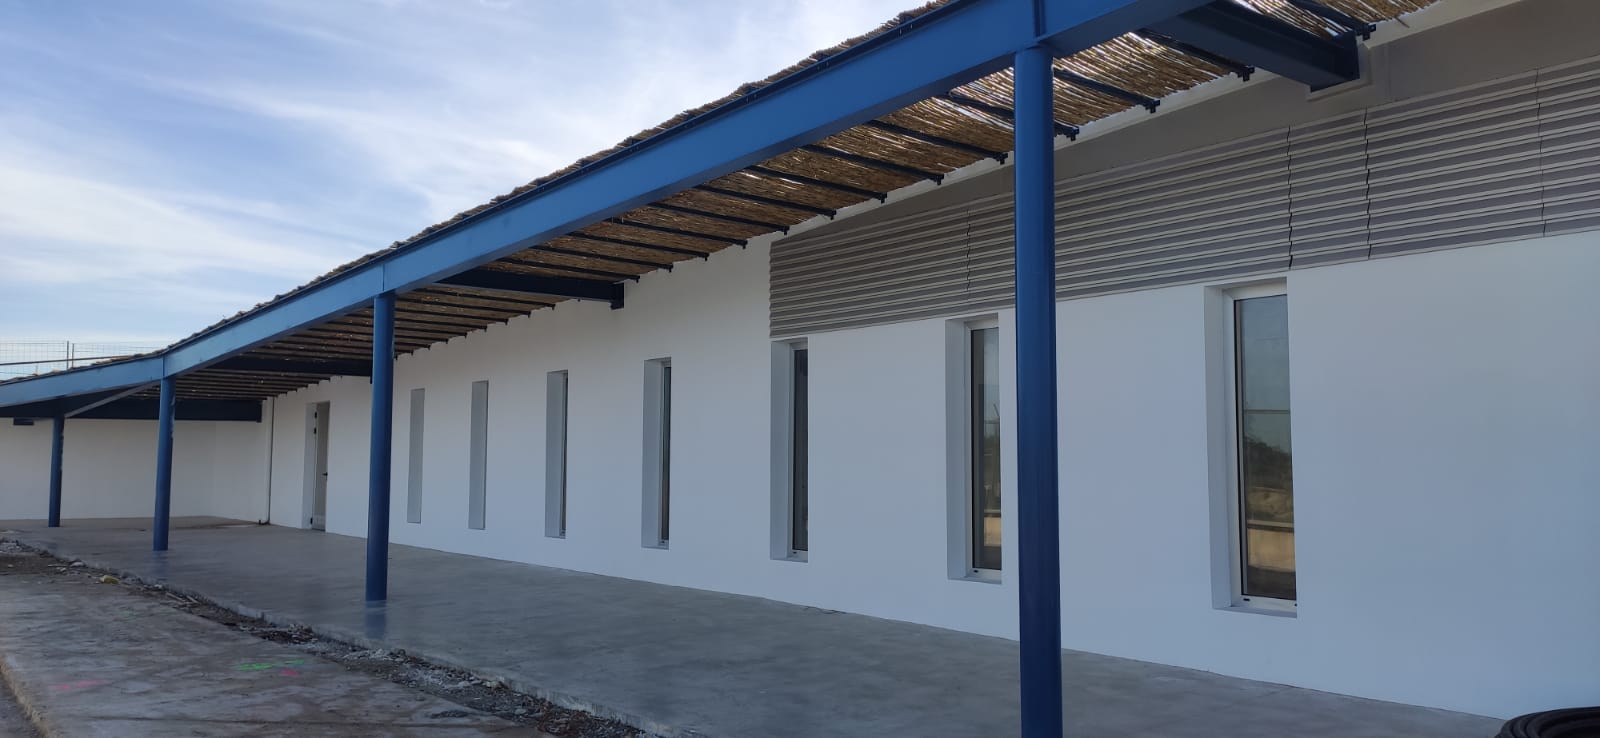 The port of Savina has a new building for the fisherman’s association of Formentera